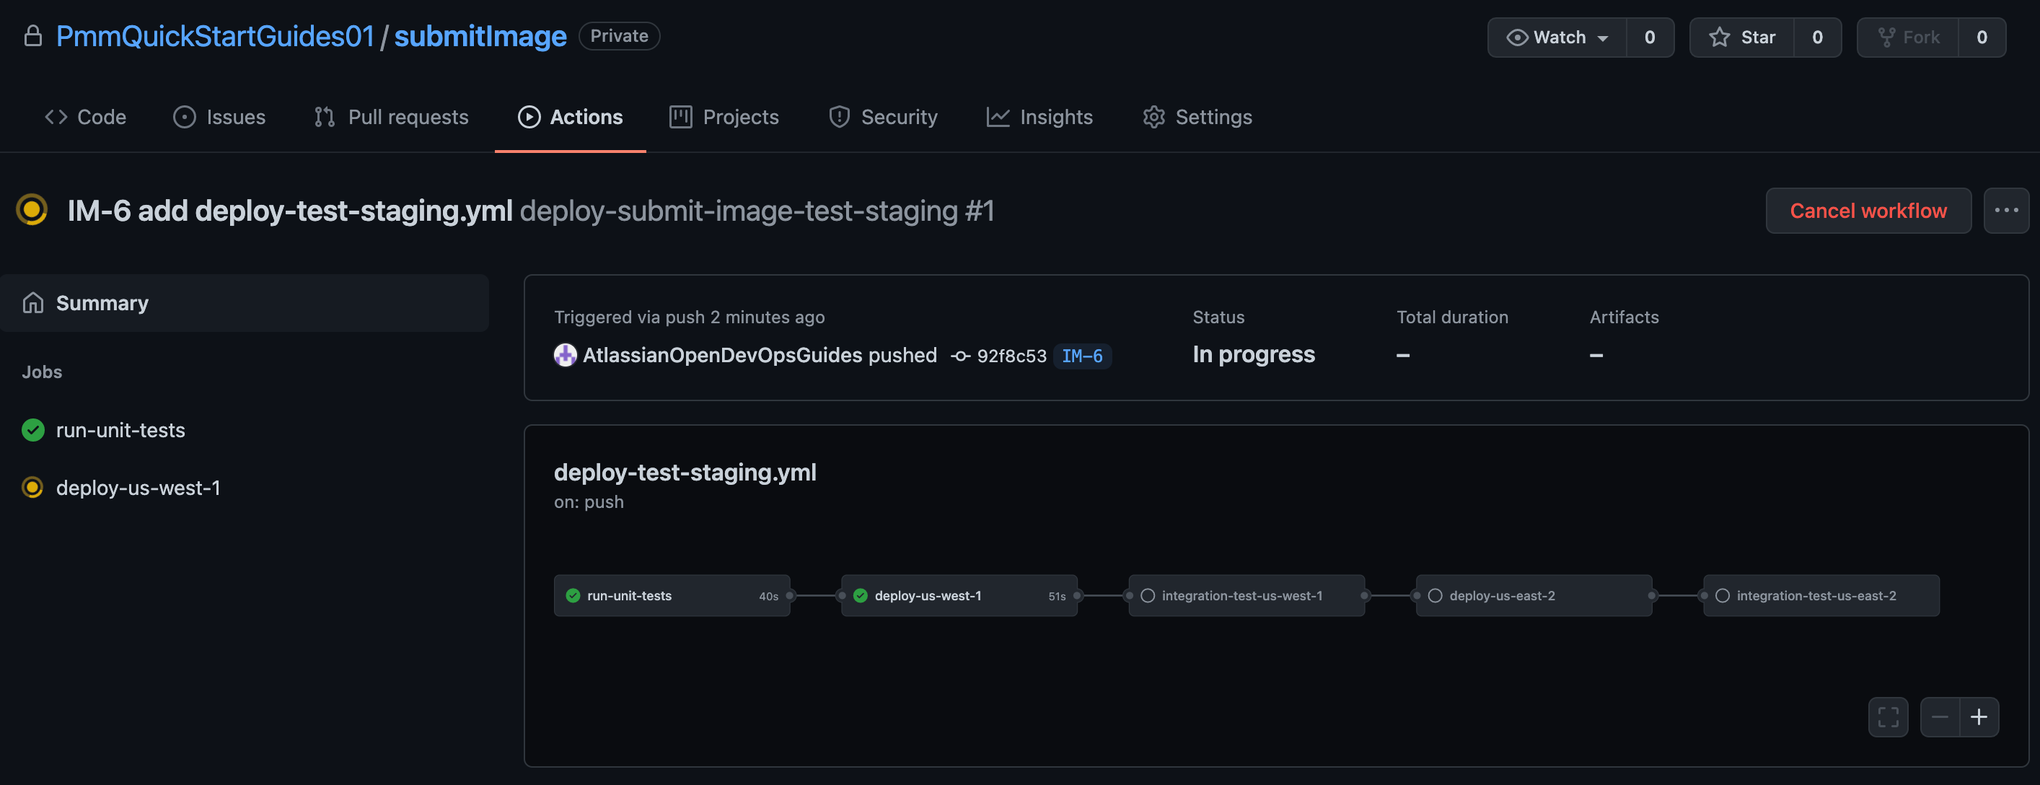 screenshot of running workflows started in github